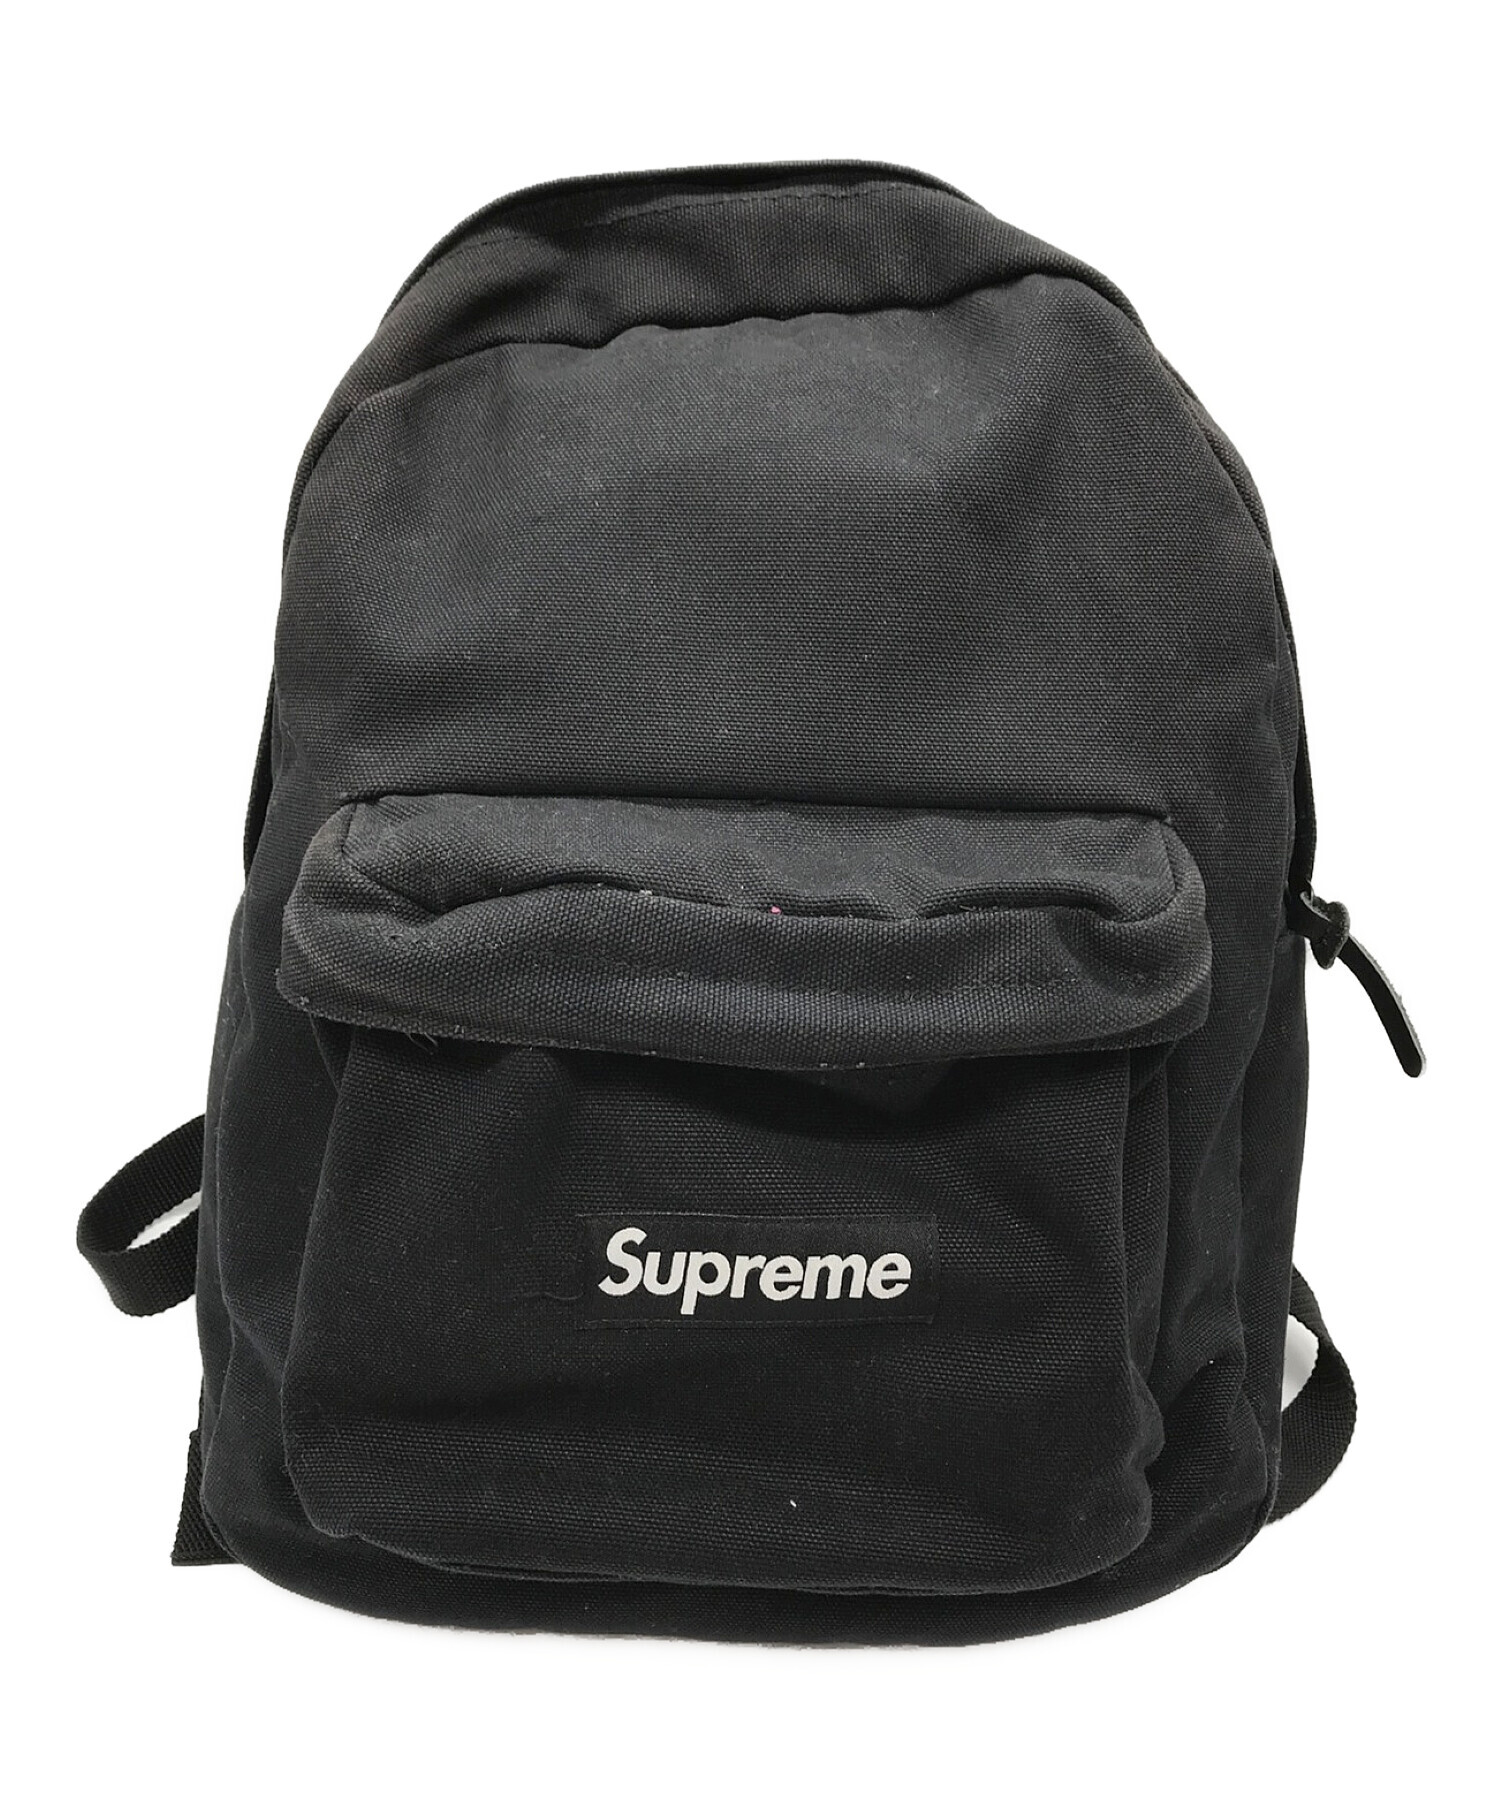 20AW Supreme Canvas Backpack 黒 バックパック